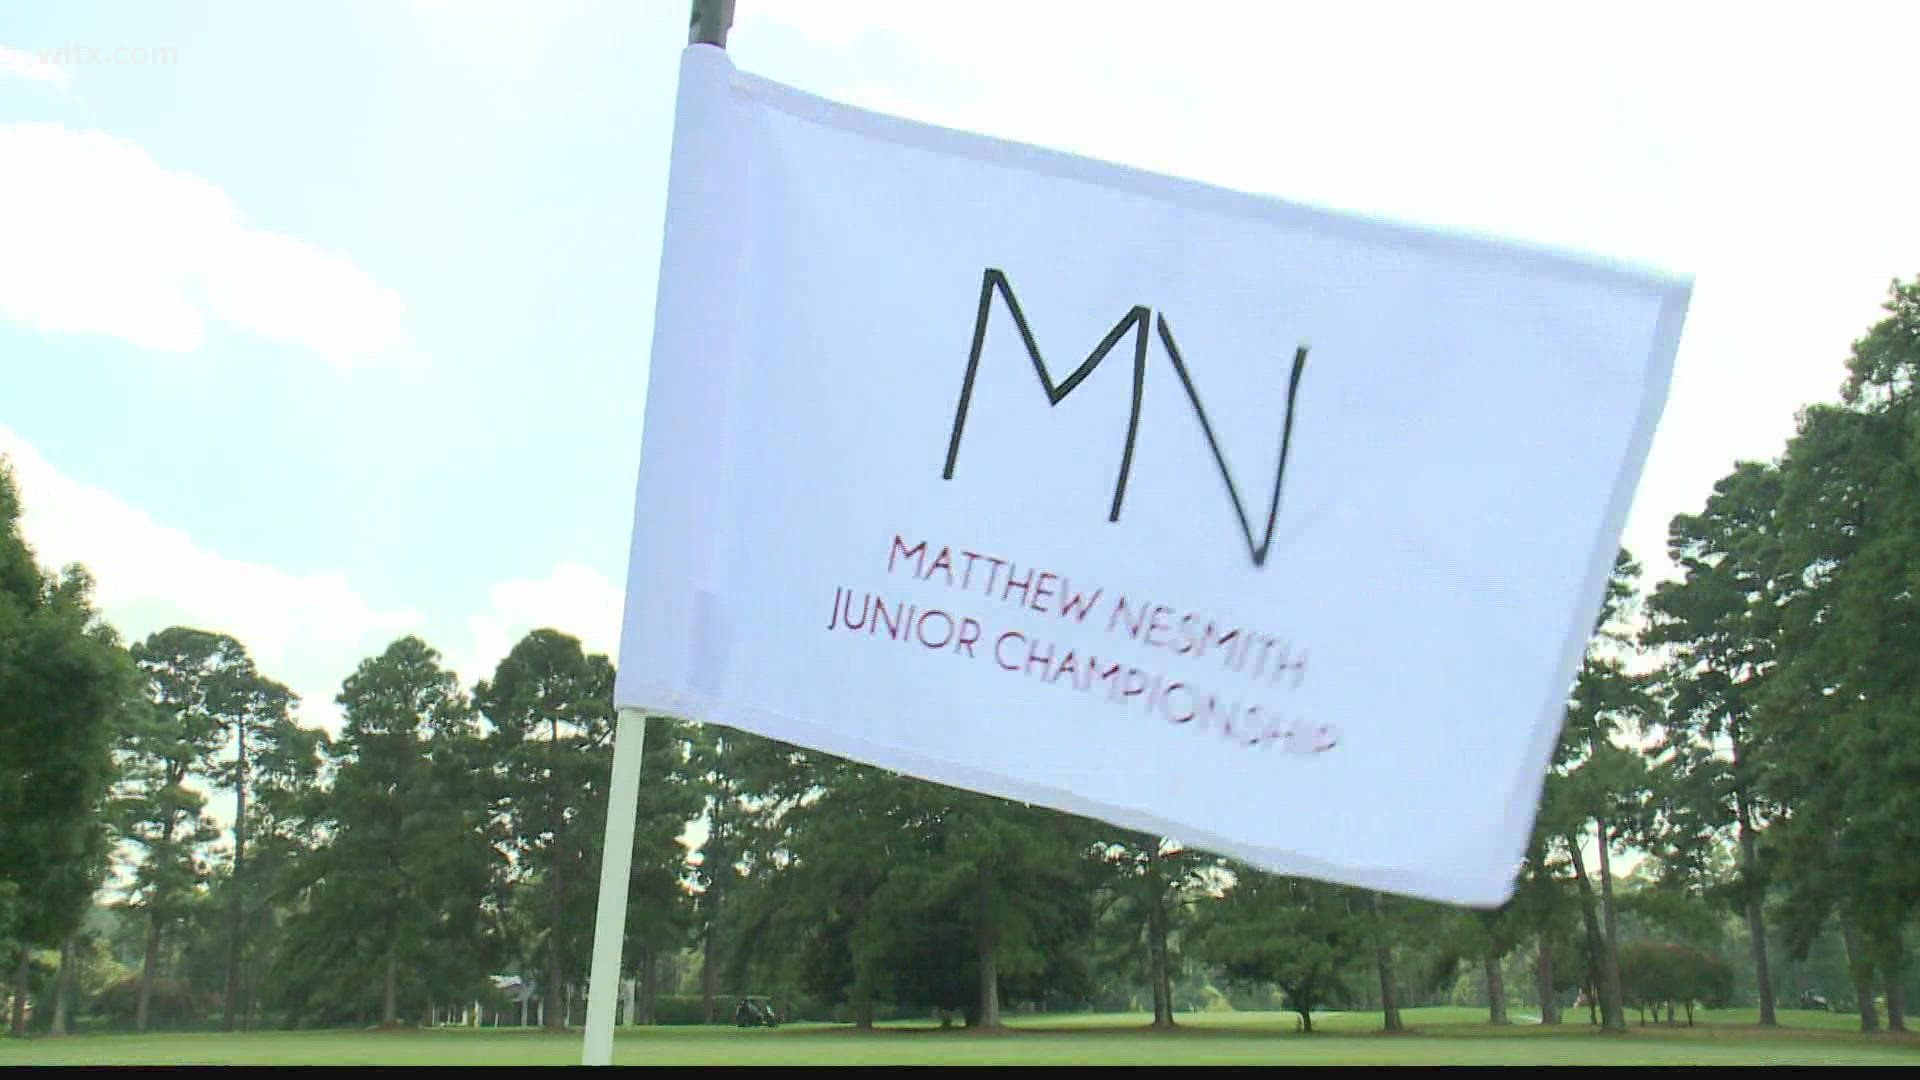 Former Gamecock golfer Matt NeSmith is back in town this week hosting his junior championship at the Forest Lake Club in Forest Acres.